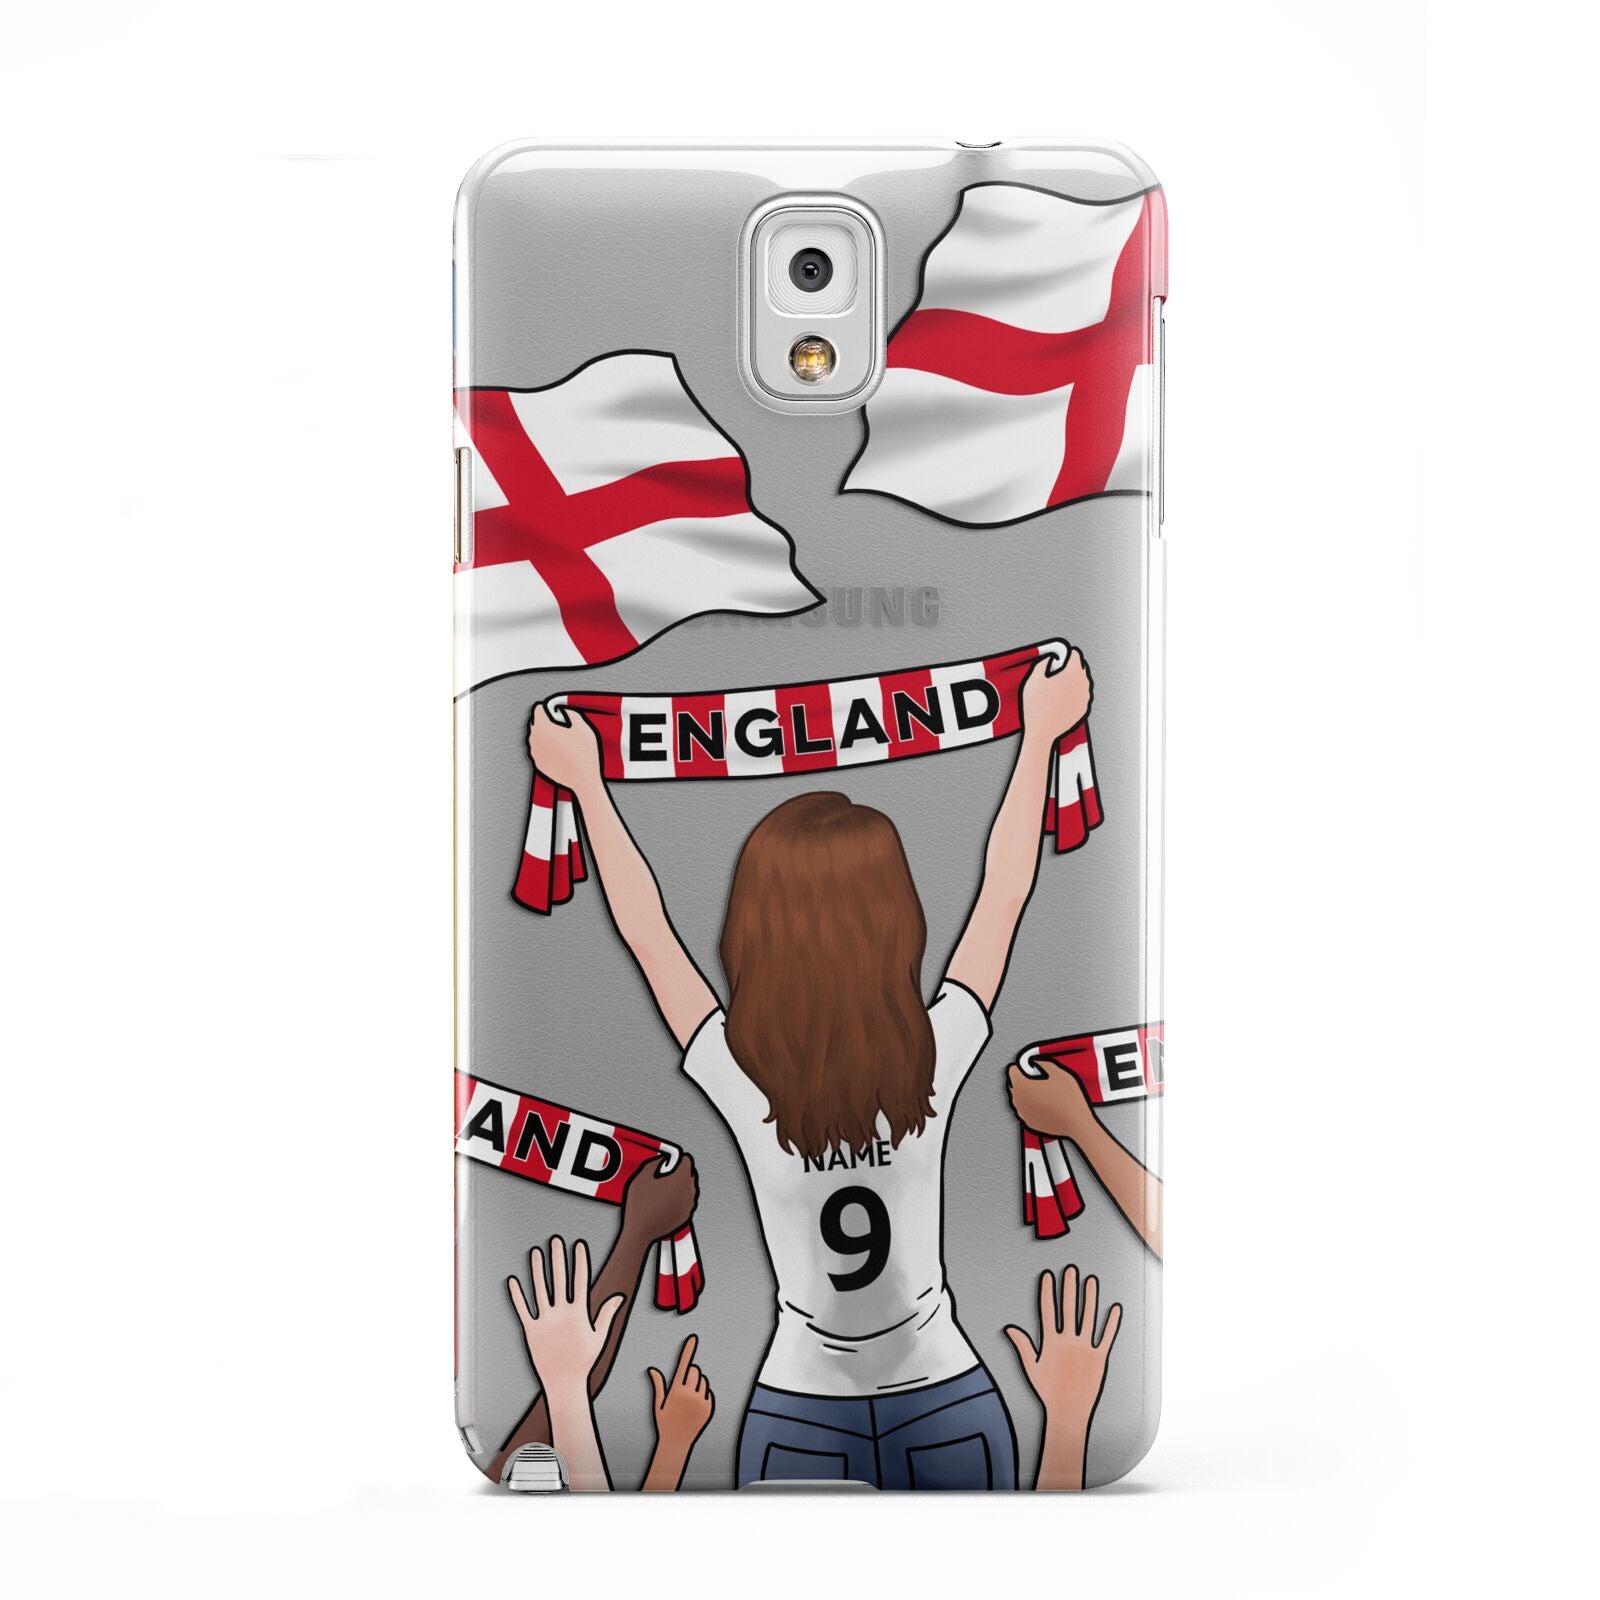 Football Supporter Personalised Samsung Galaxy Note 3 Case